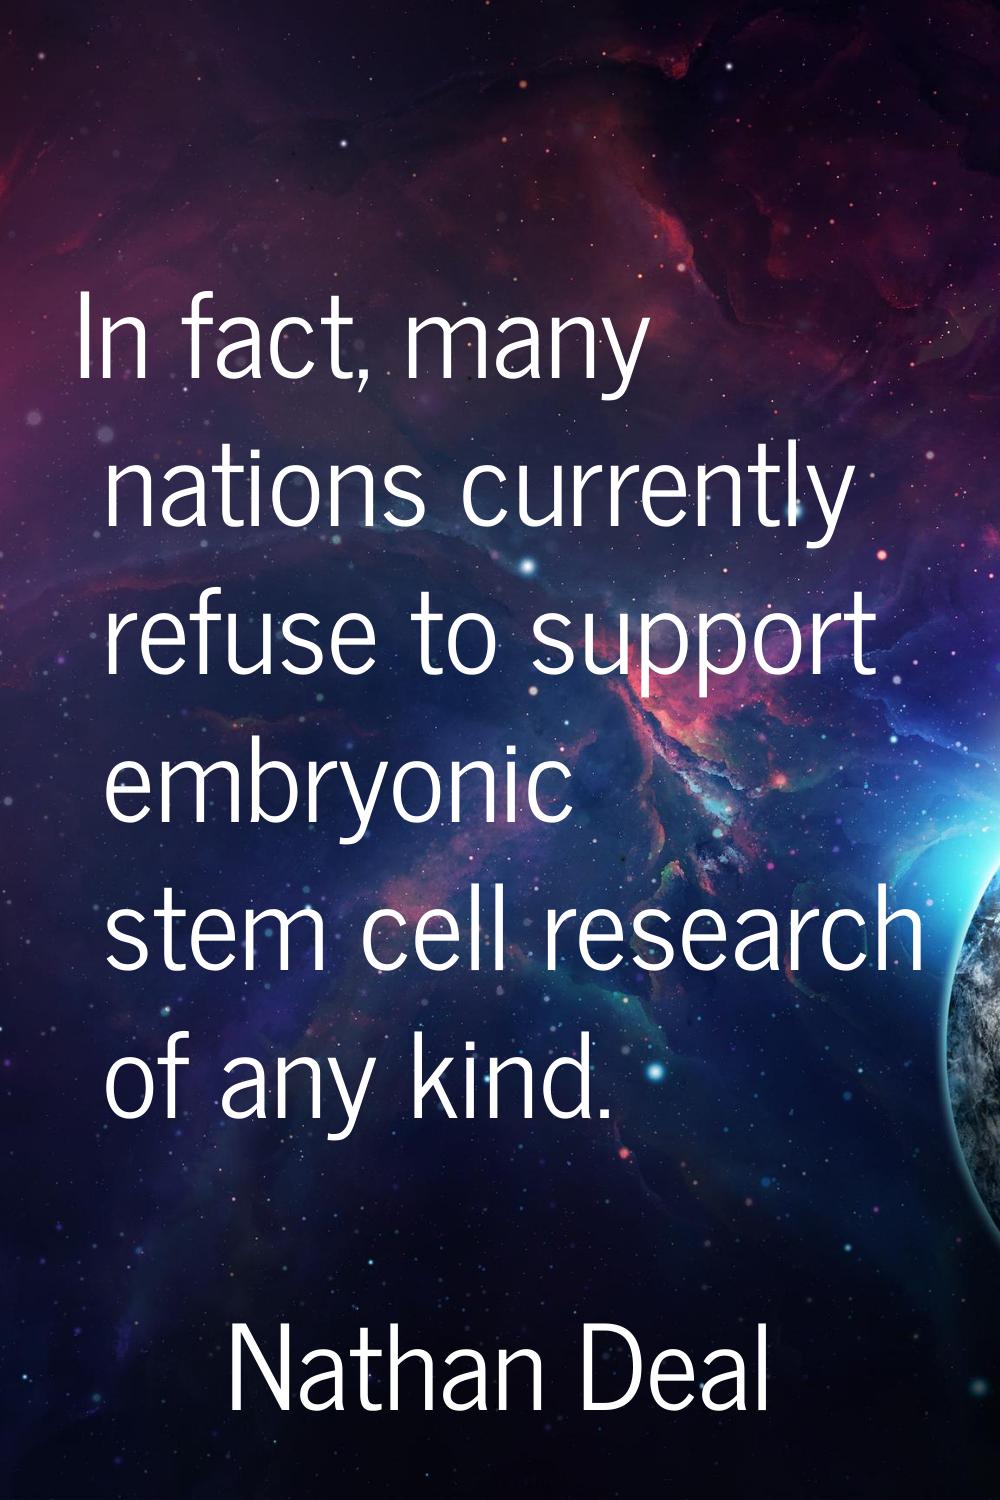 In fact, many nations currently refuse to support embryonic stem cell research of any kind.